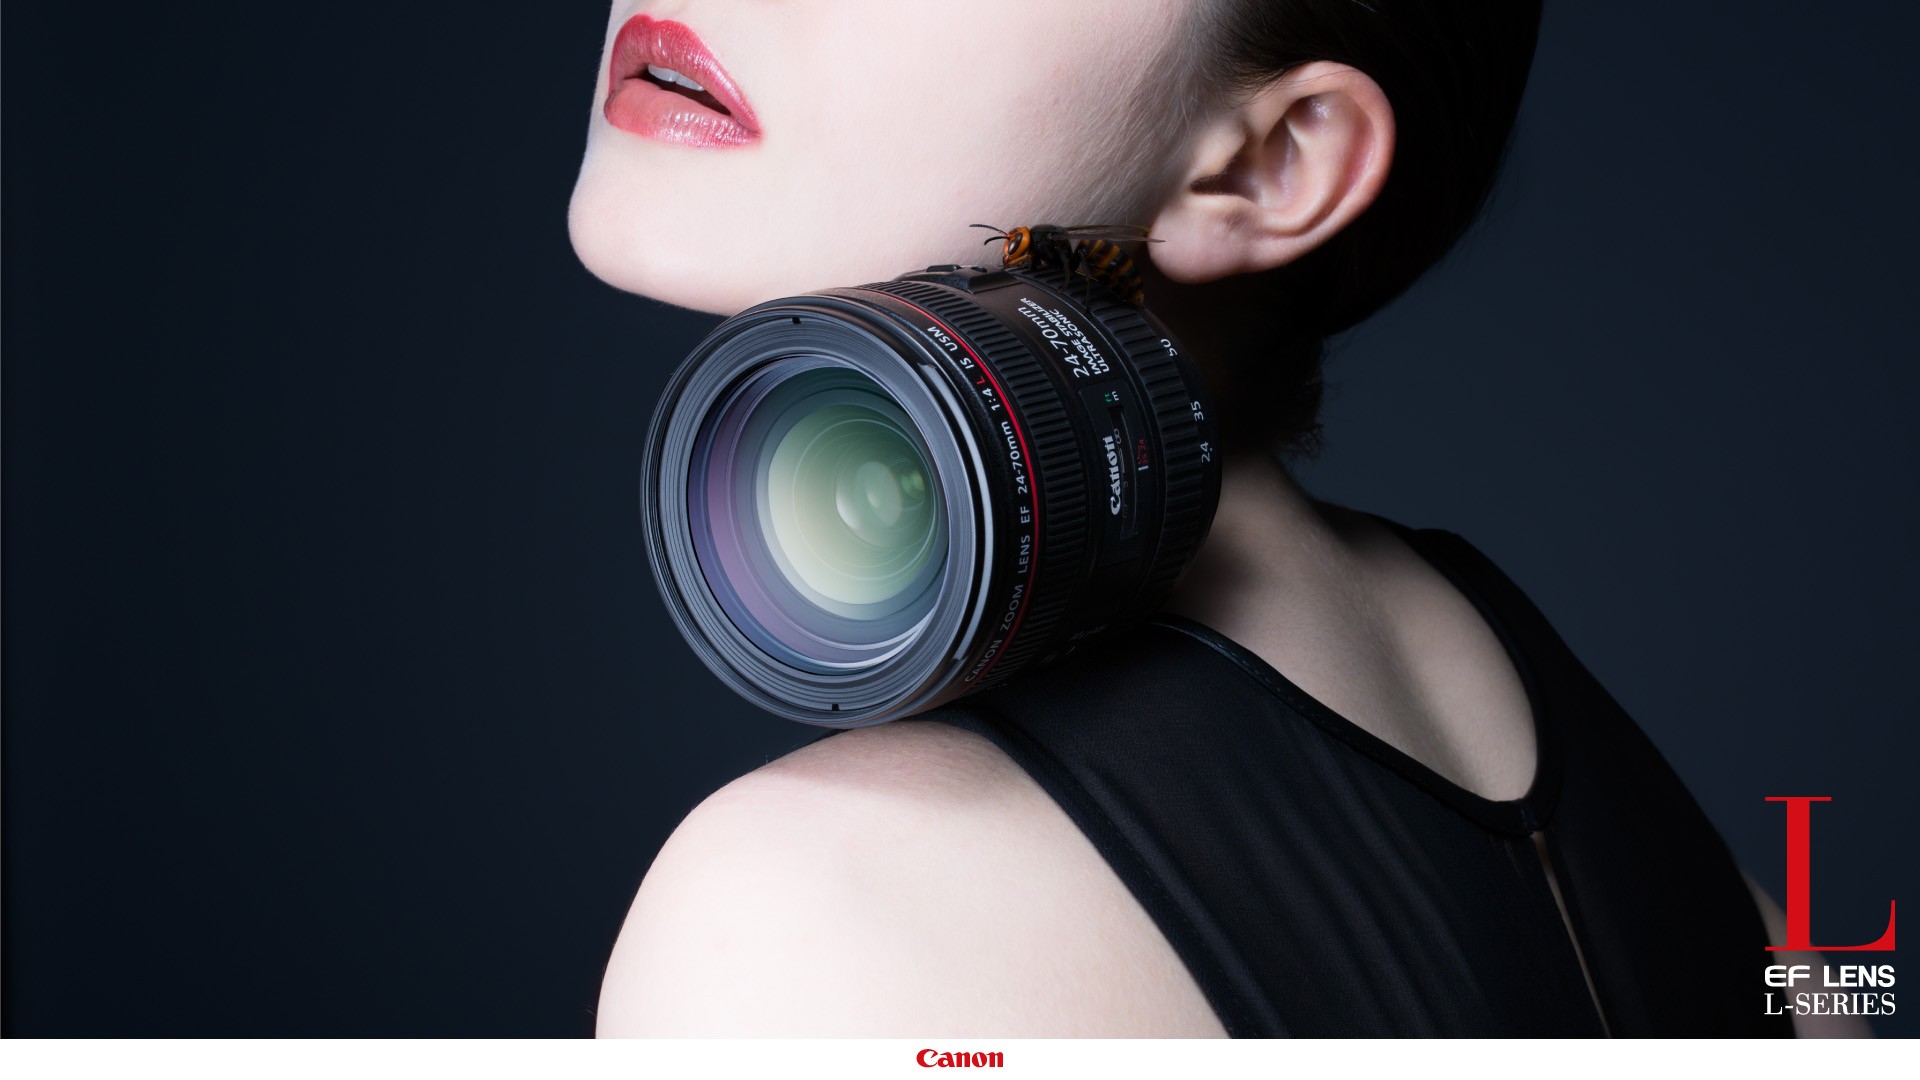 Canon Lens Woman Wasp 1920x1080